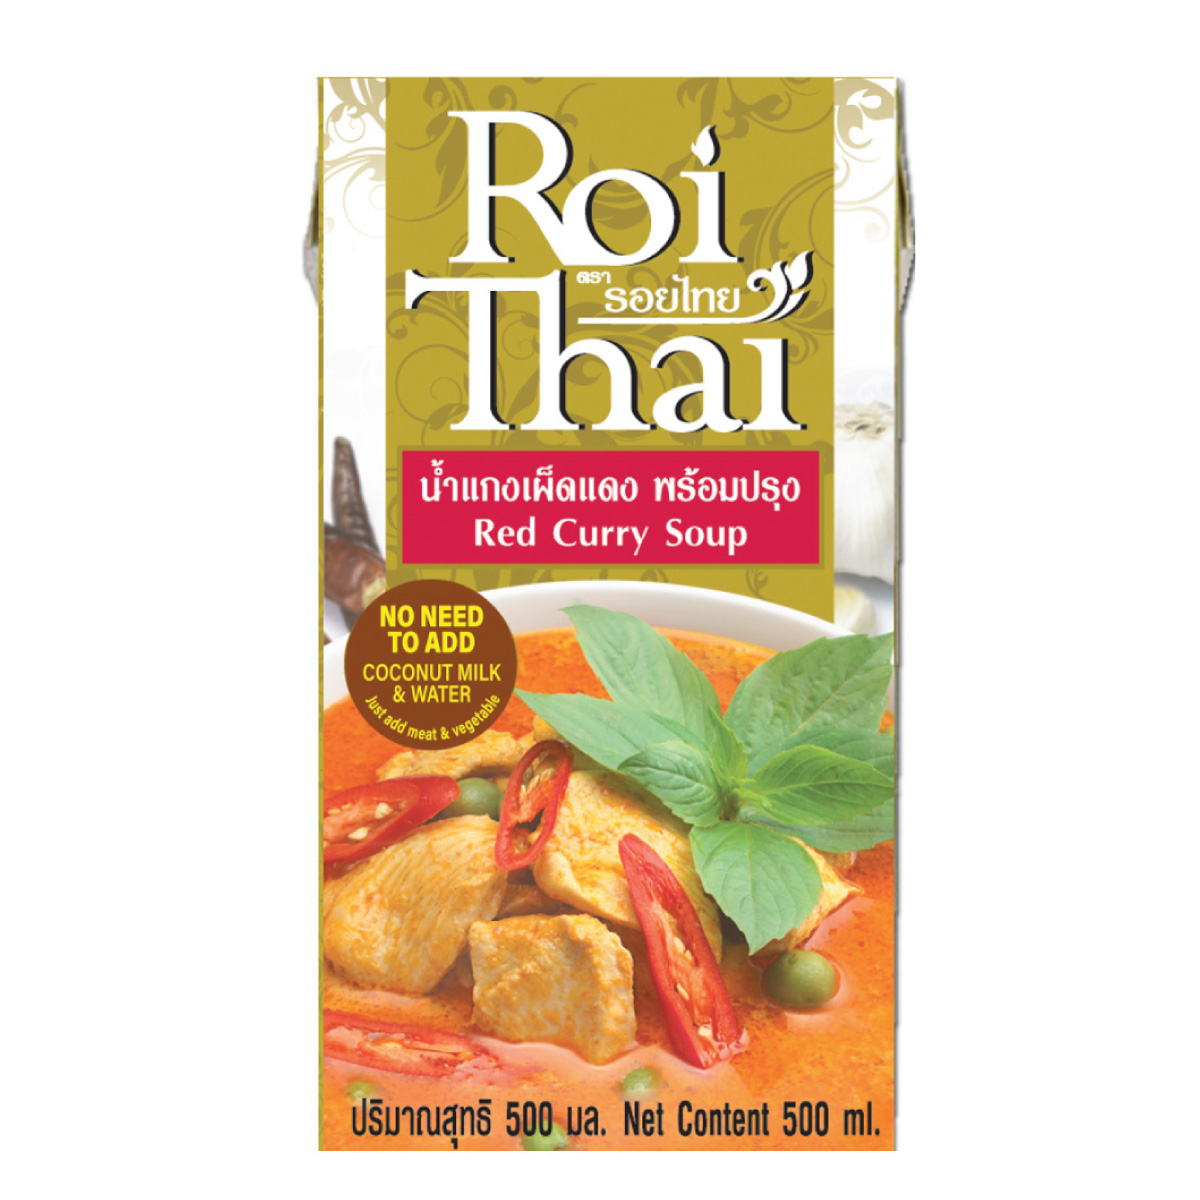 ROIT-Red-Curry-Soup-500ml-1200x